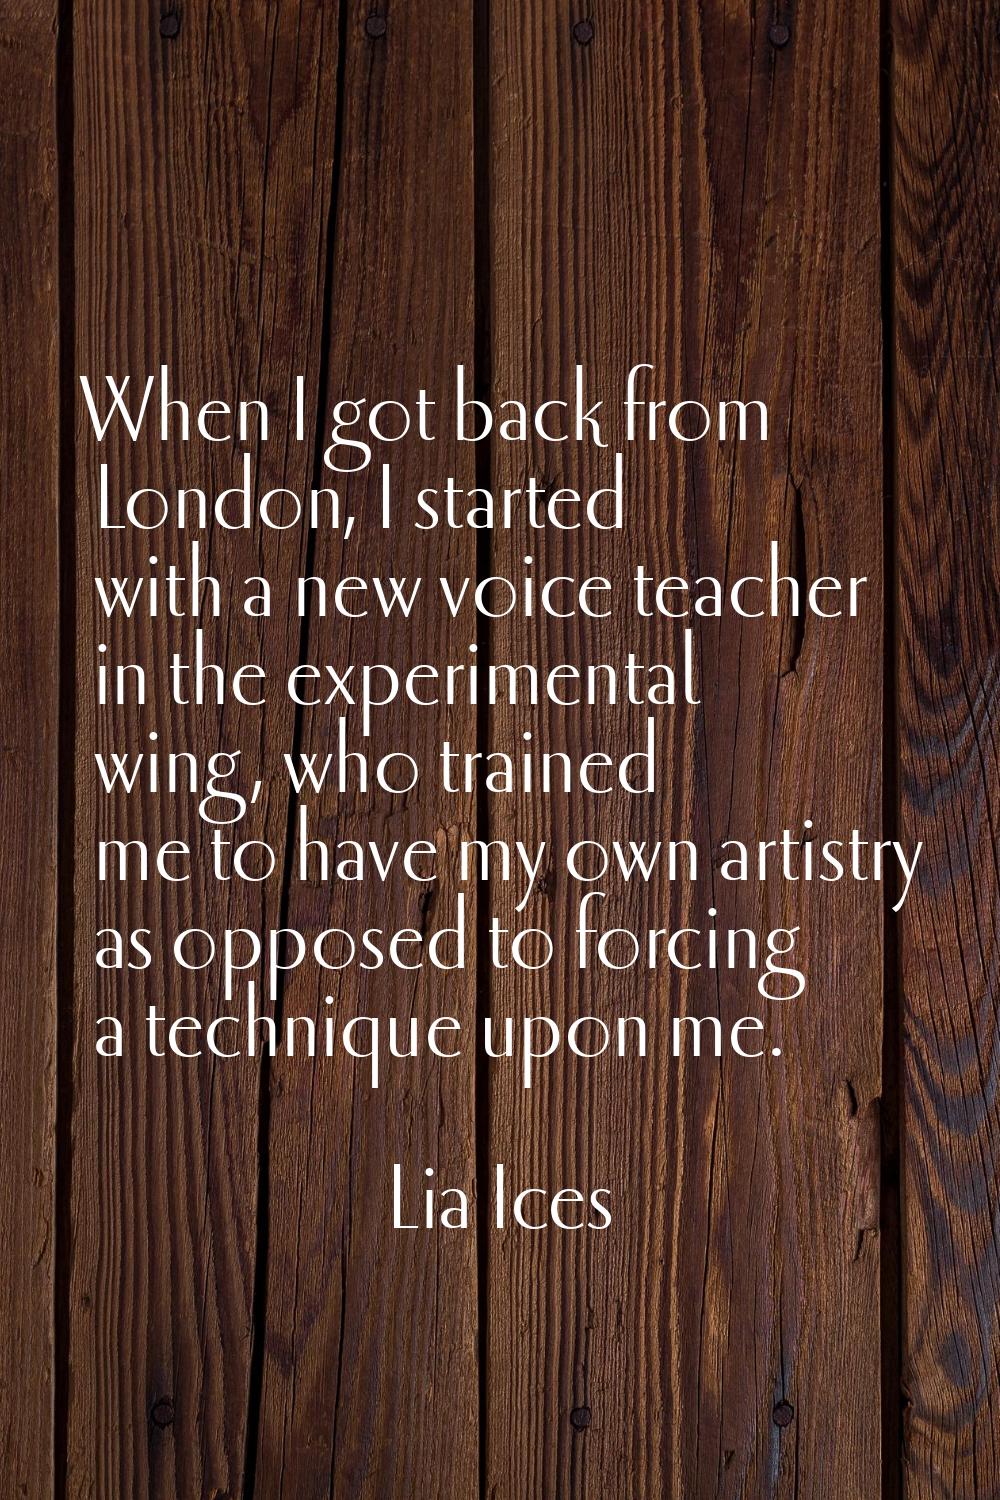 When I got back from London, I started with a new voice teacher in the experimental wing, who train